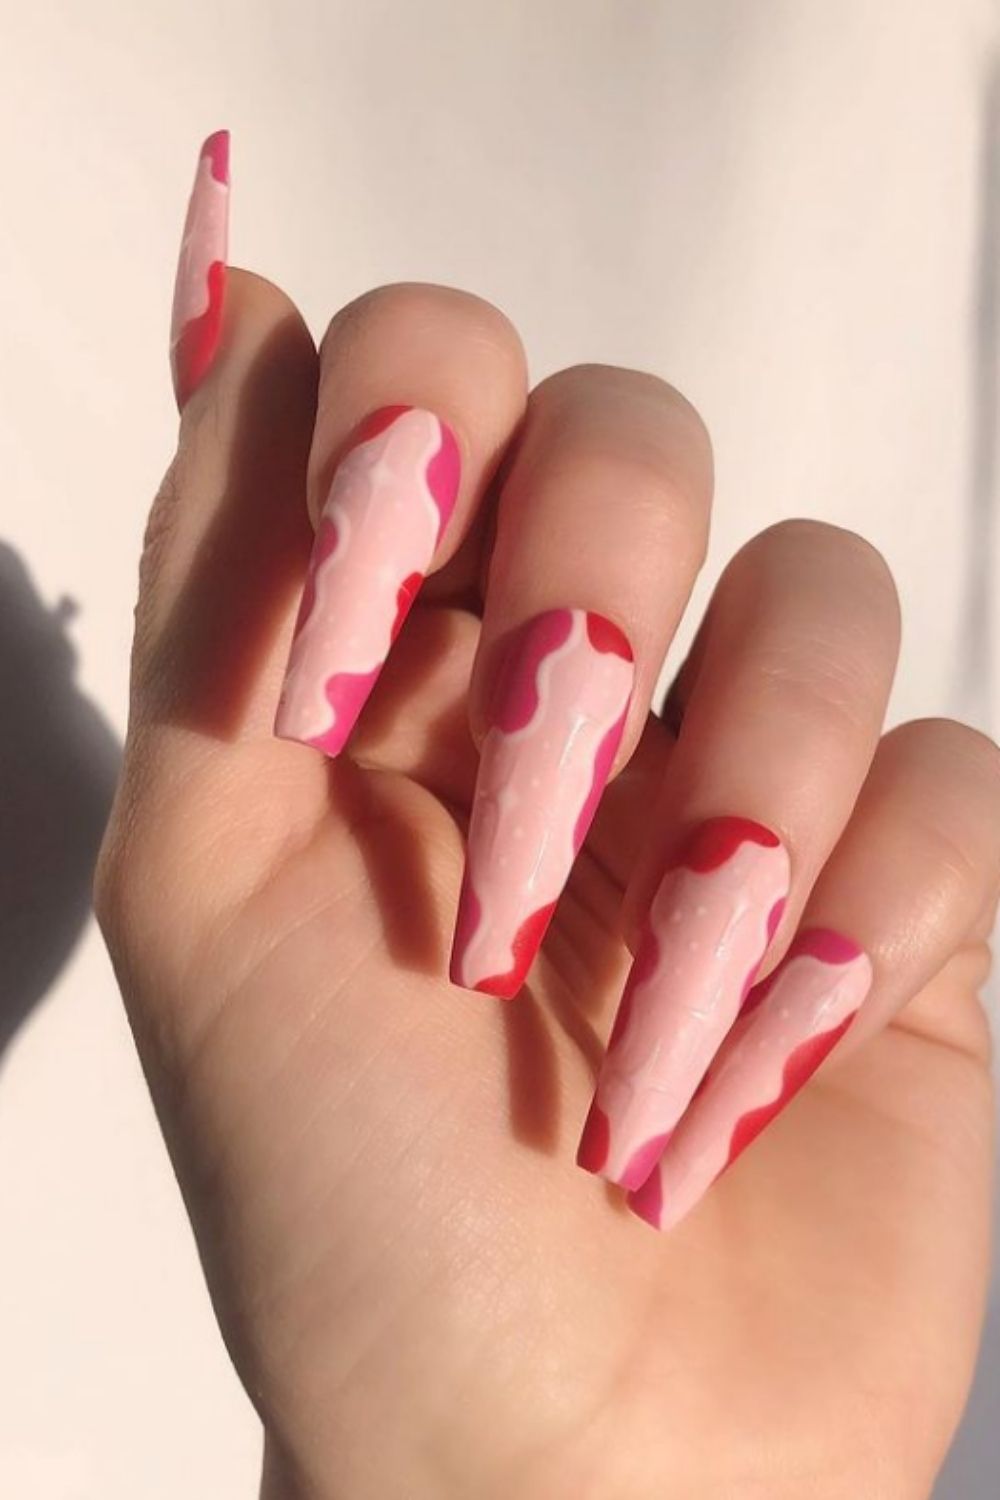 Ballerina acrylic nails | the ultimate guide nail ideas for your next manicure